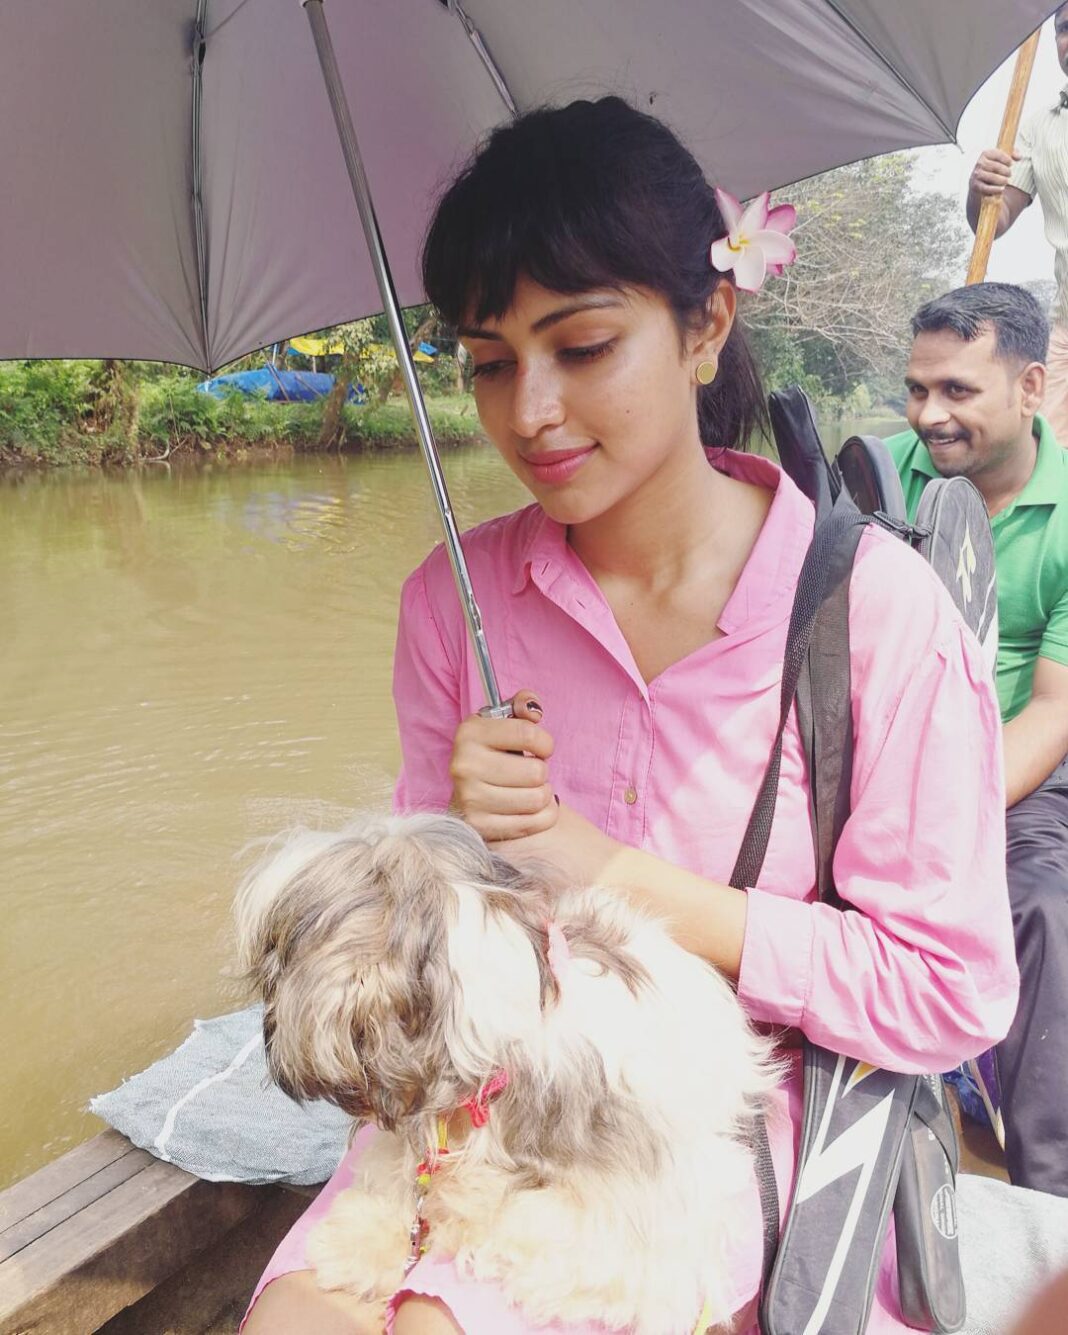 Amala Paul Instagram - At times I need to run away from the craziness of the city life and needless speculations. For now I am preferring a boat ride, atleast no allegations of breaking the law or should I double check with my ‘well wishers 🤥’ #keralapiraviashamsakal #boatride #noregistration